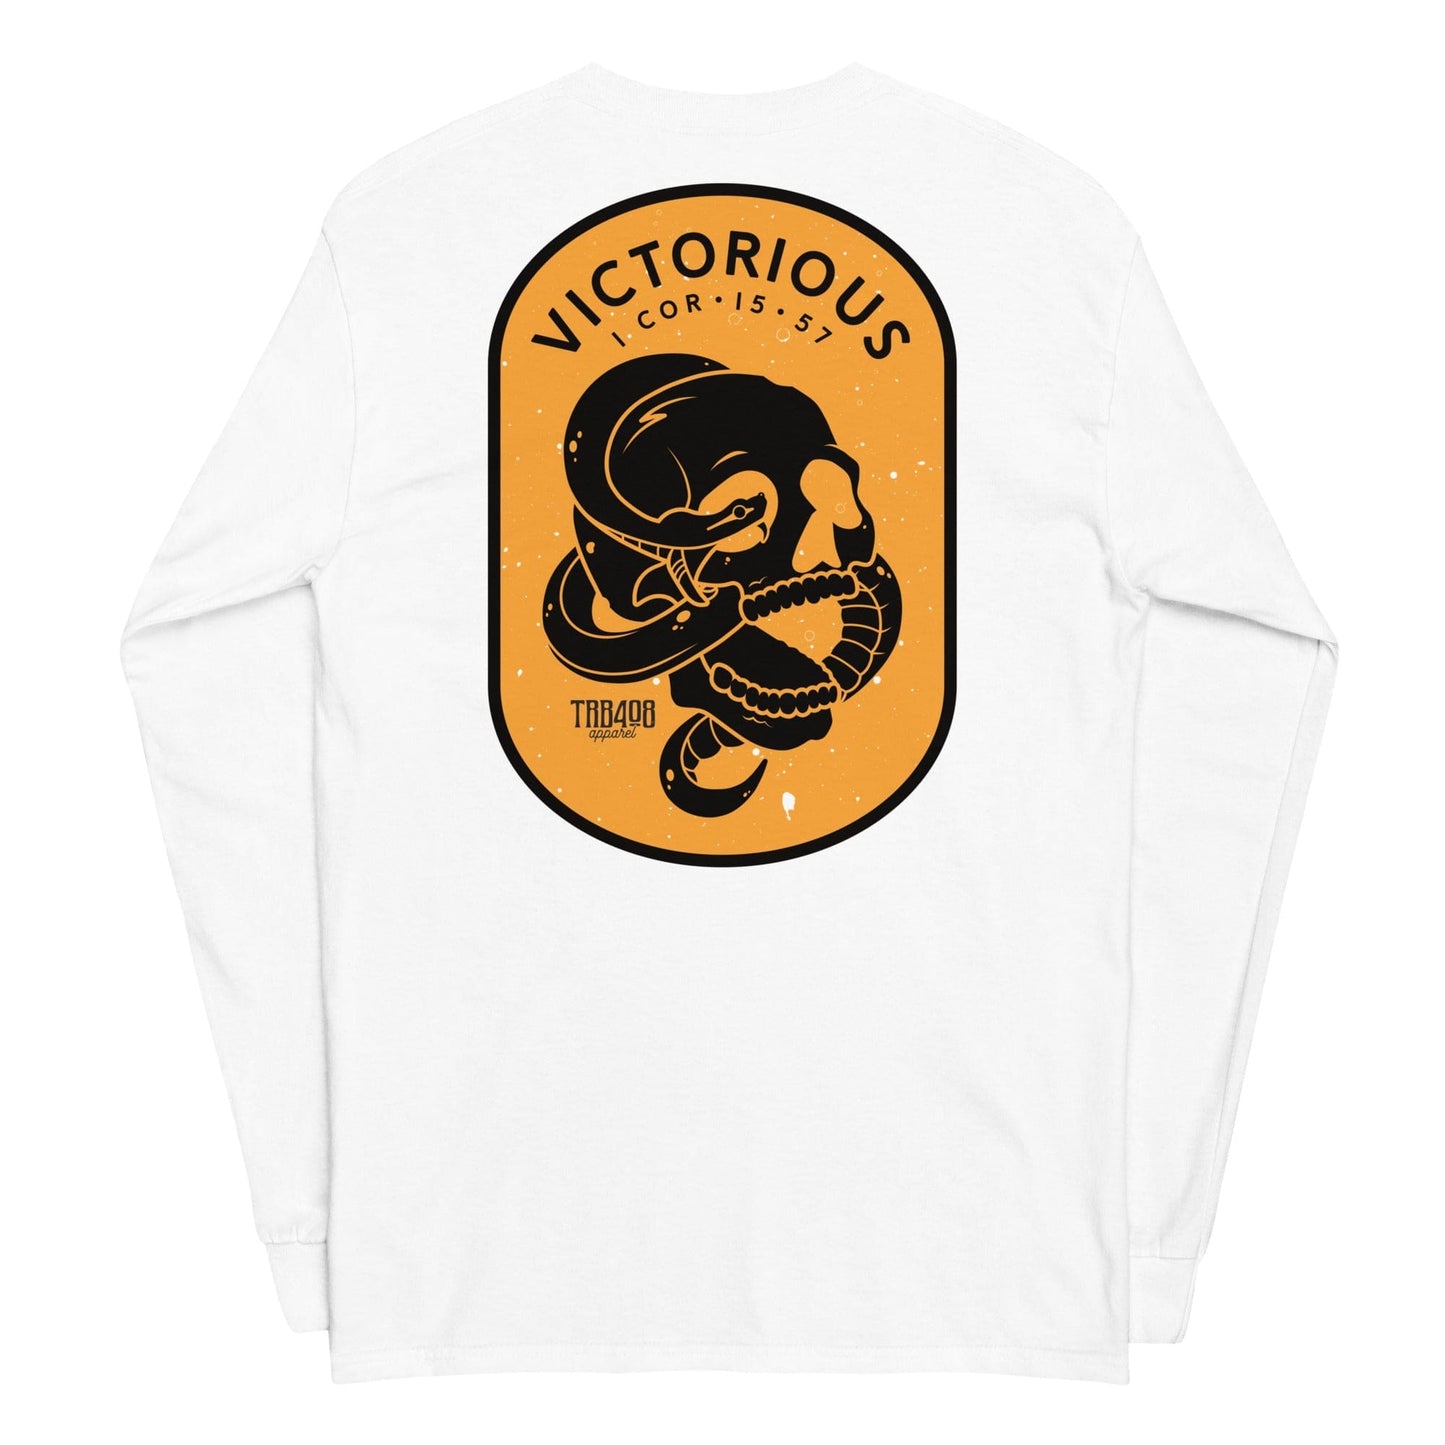 The VICTORIOUS Tee